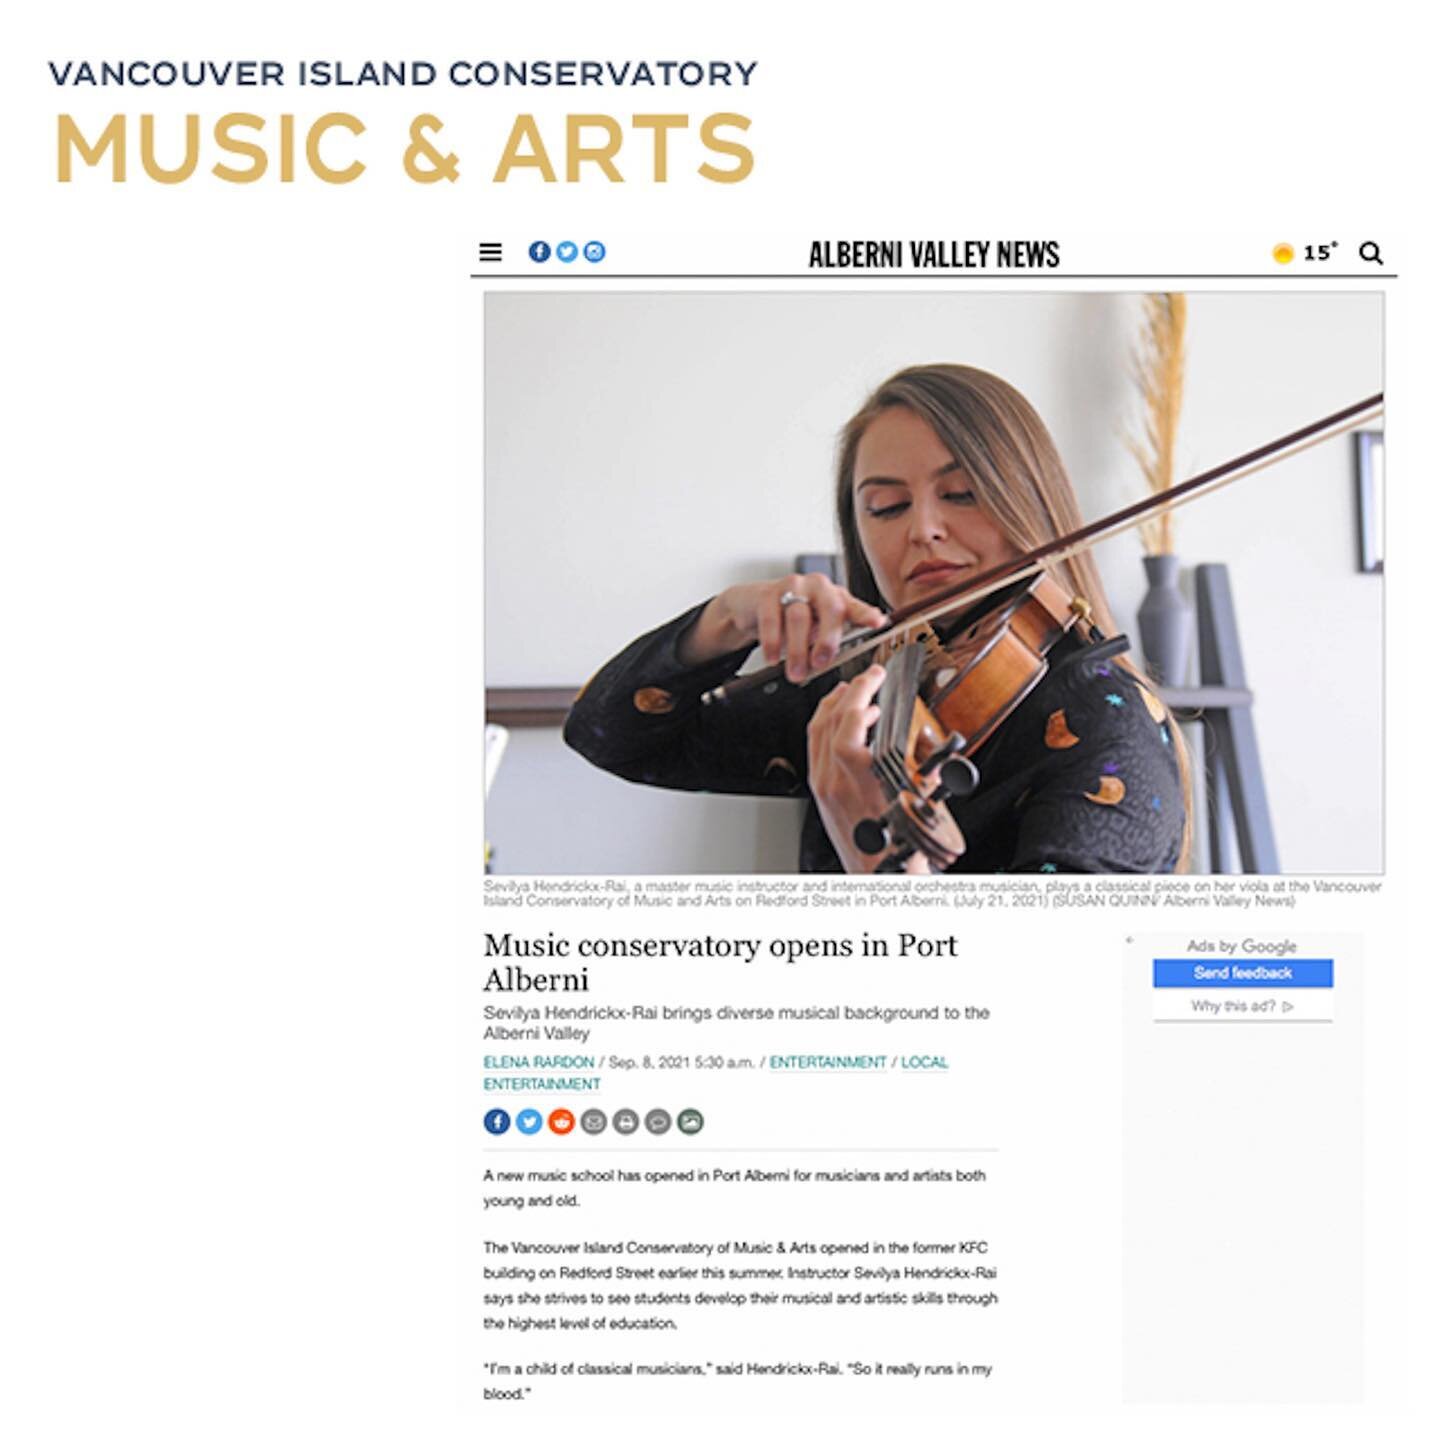 We are excited to be featured in the @alberninews!! Thank you @playinpa for welcoming our Conservatory of Music &amp; Arts!!

For more information on classes please visit our website or email us at info@viconservatory.com

.
.
.
.

#musicschool #musi